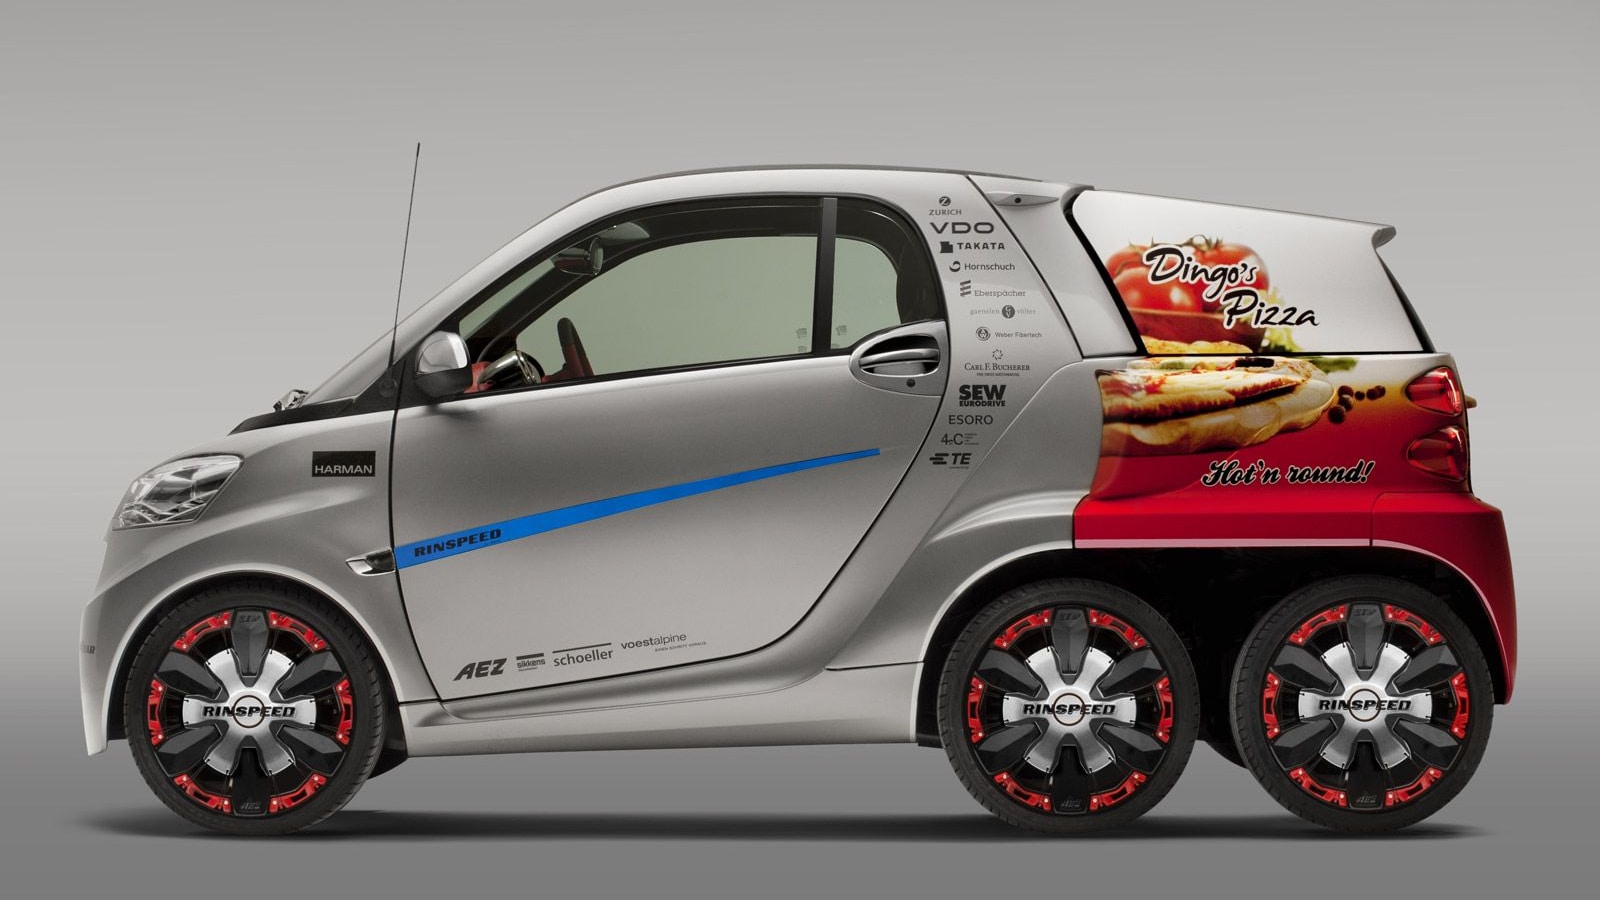 2012 Rinspeed Dock+Go Concept based on the Smart ForTwo